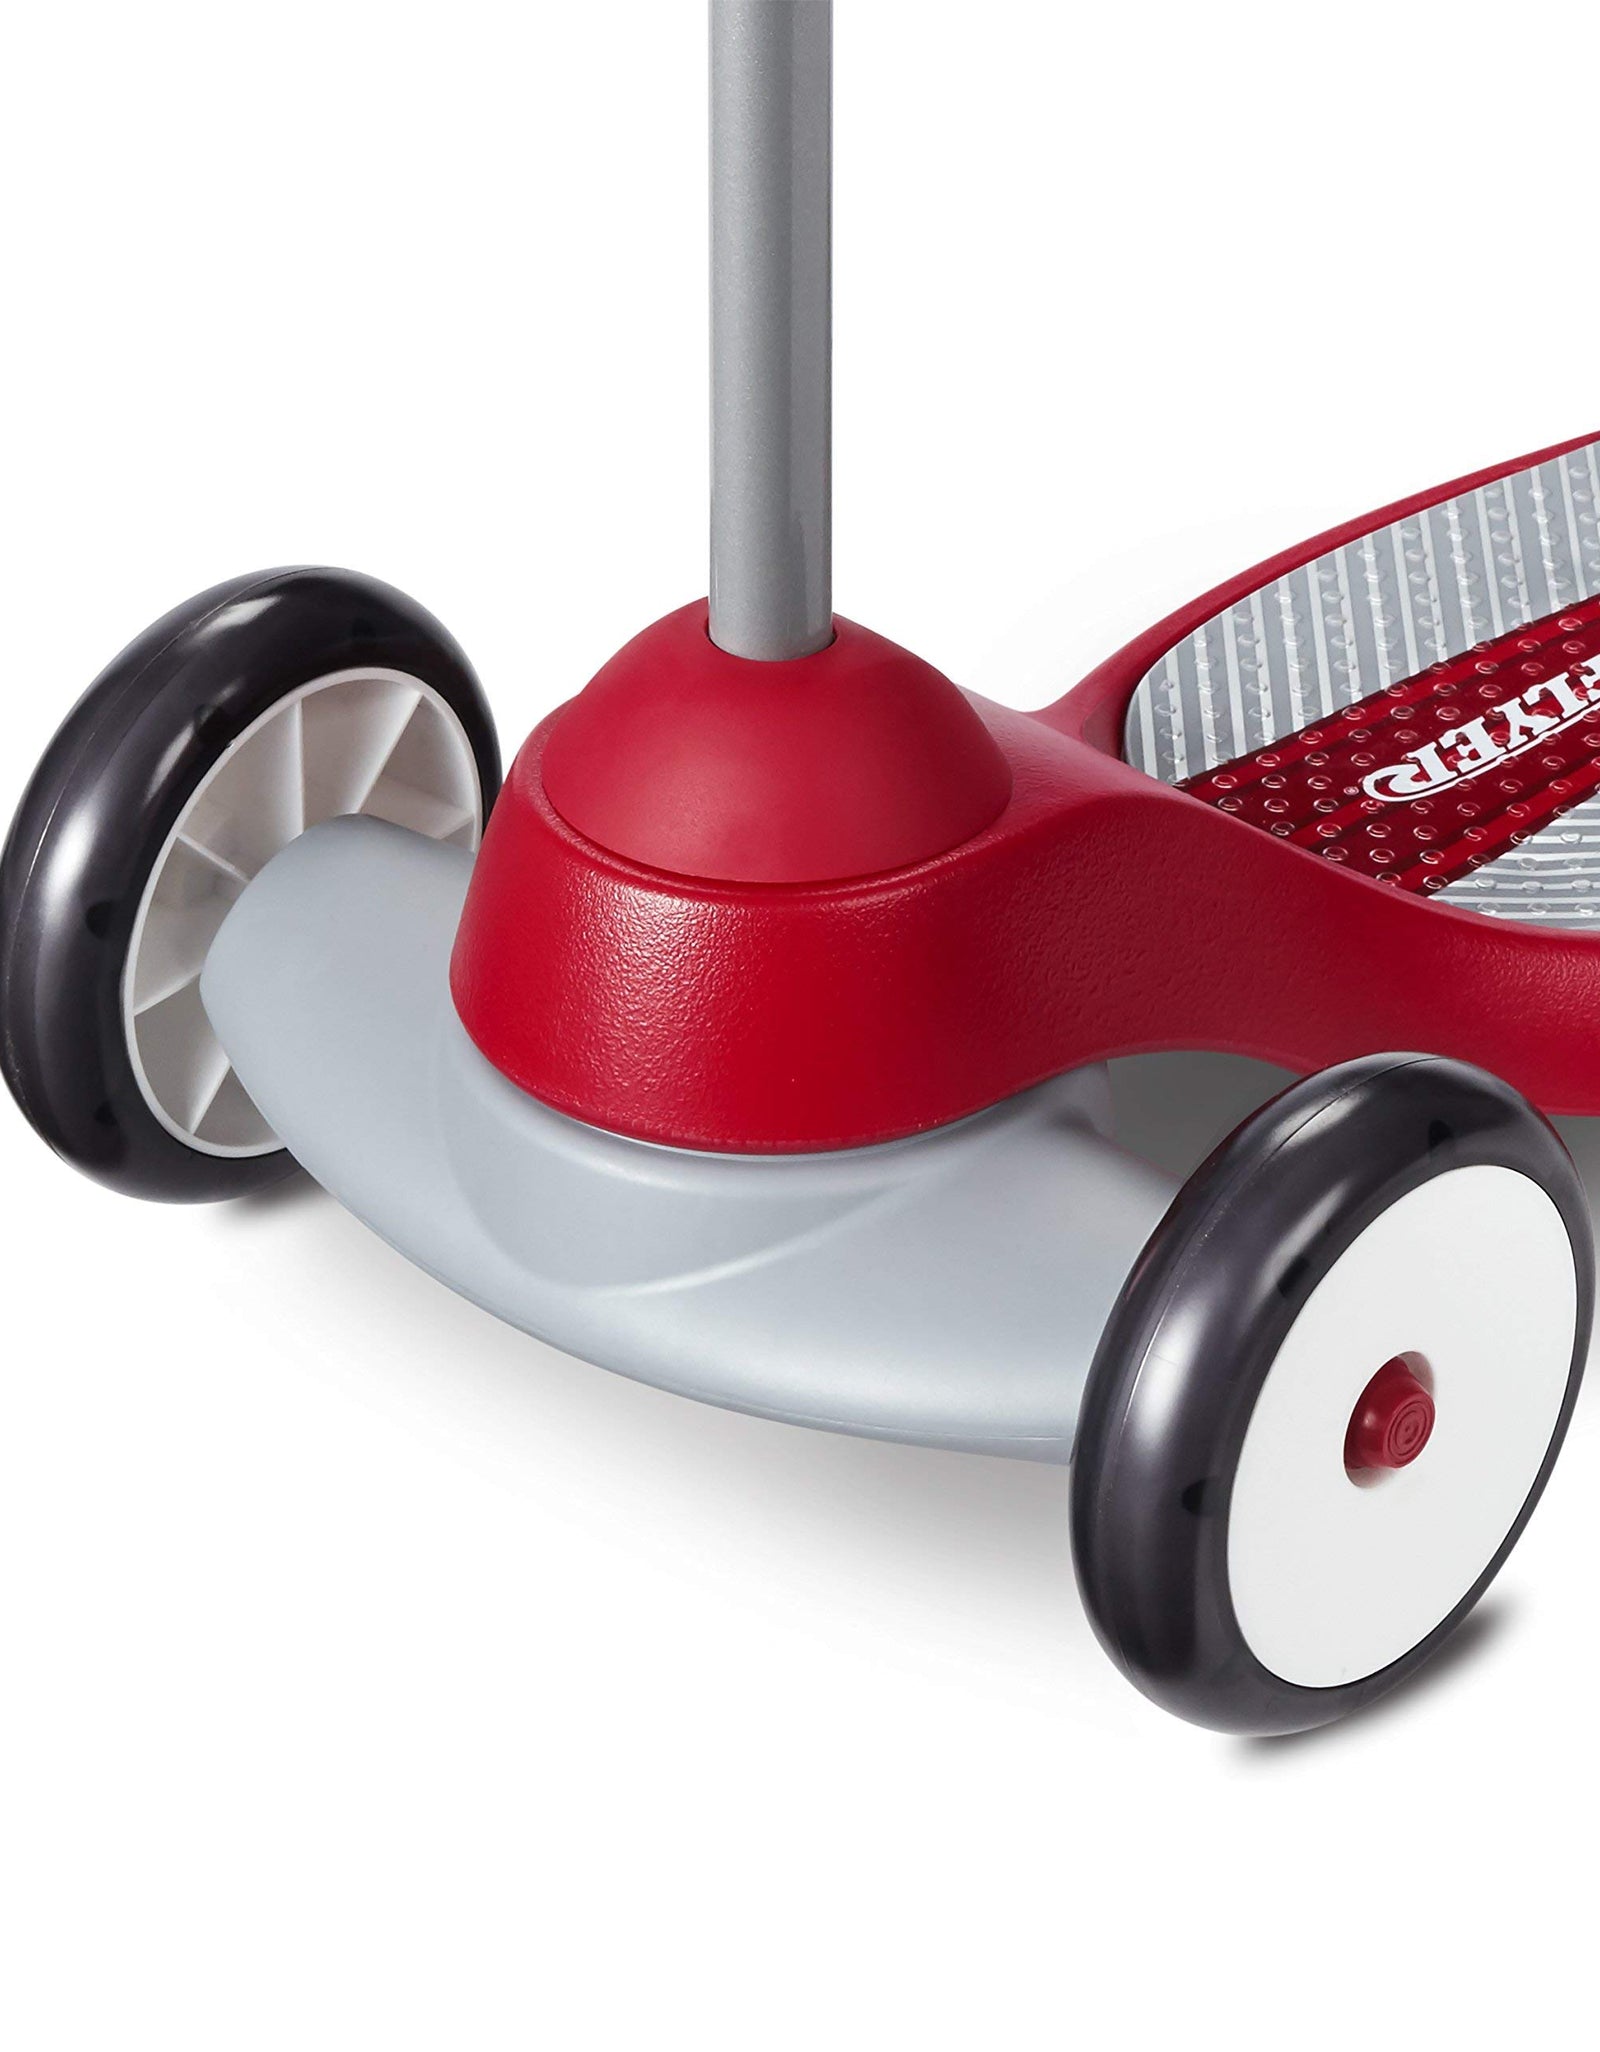 Radio Flyer My 1st Scooter, toddler toy for ages 2-5 (Amazon Exclusive)